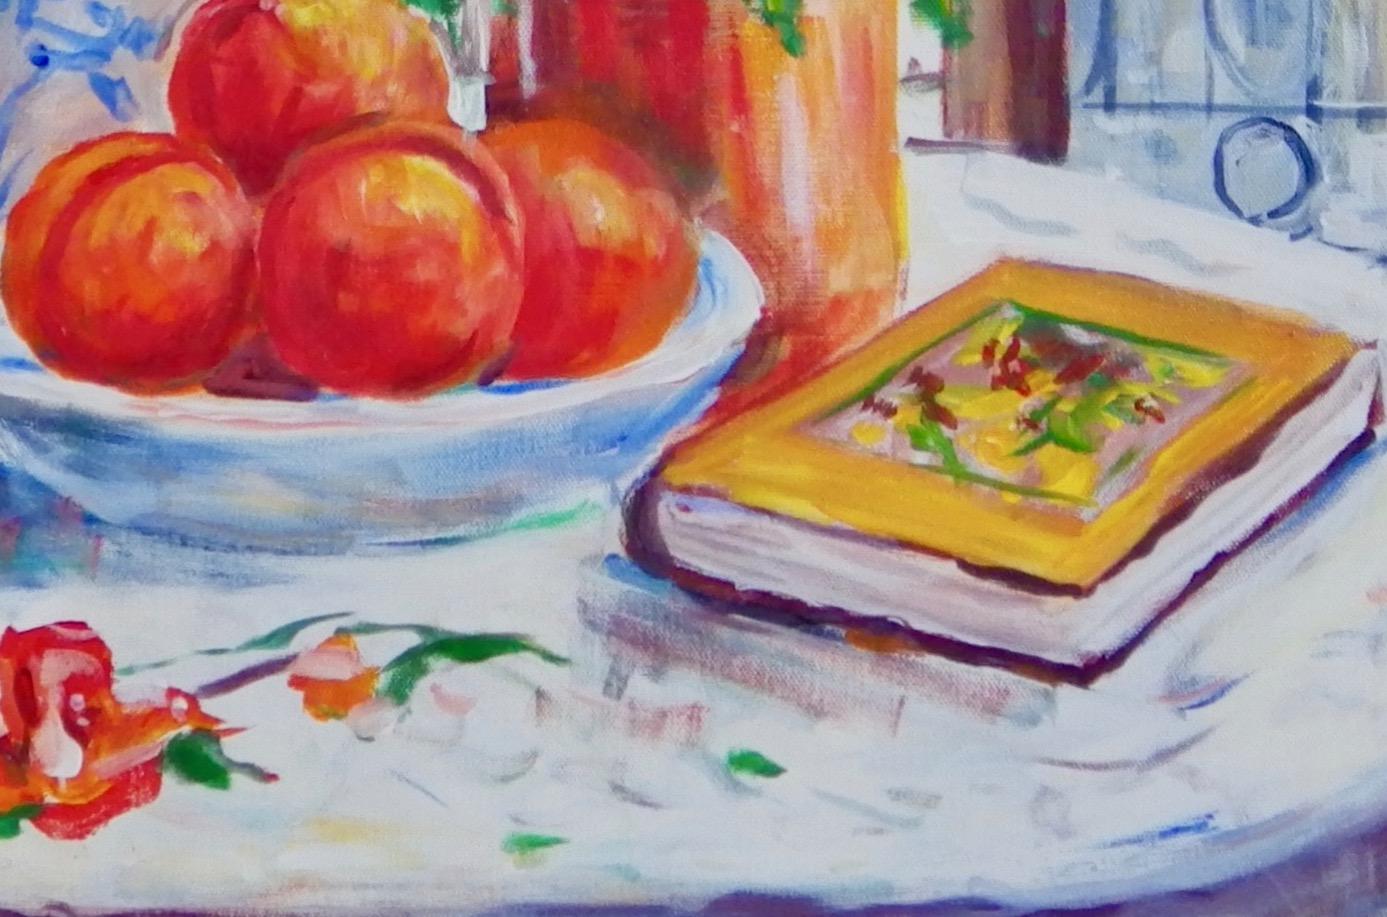 Afternoon Repose, Original Signed Impressionist Still Life Painting on Canvas - Gray Still-Life Painting by Ingrid Dohm